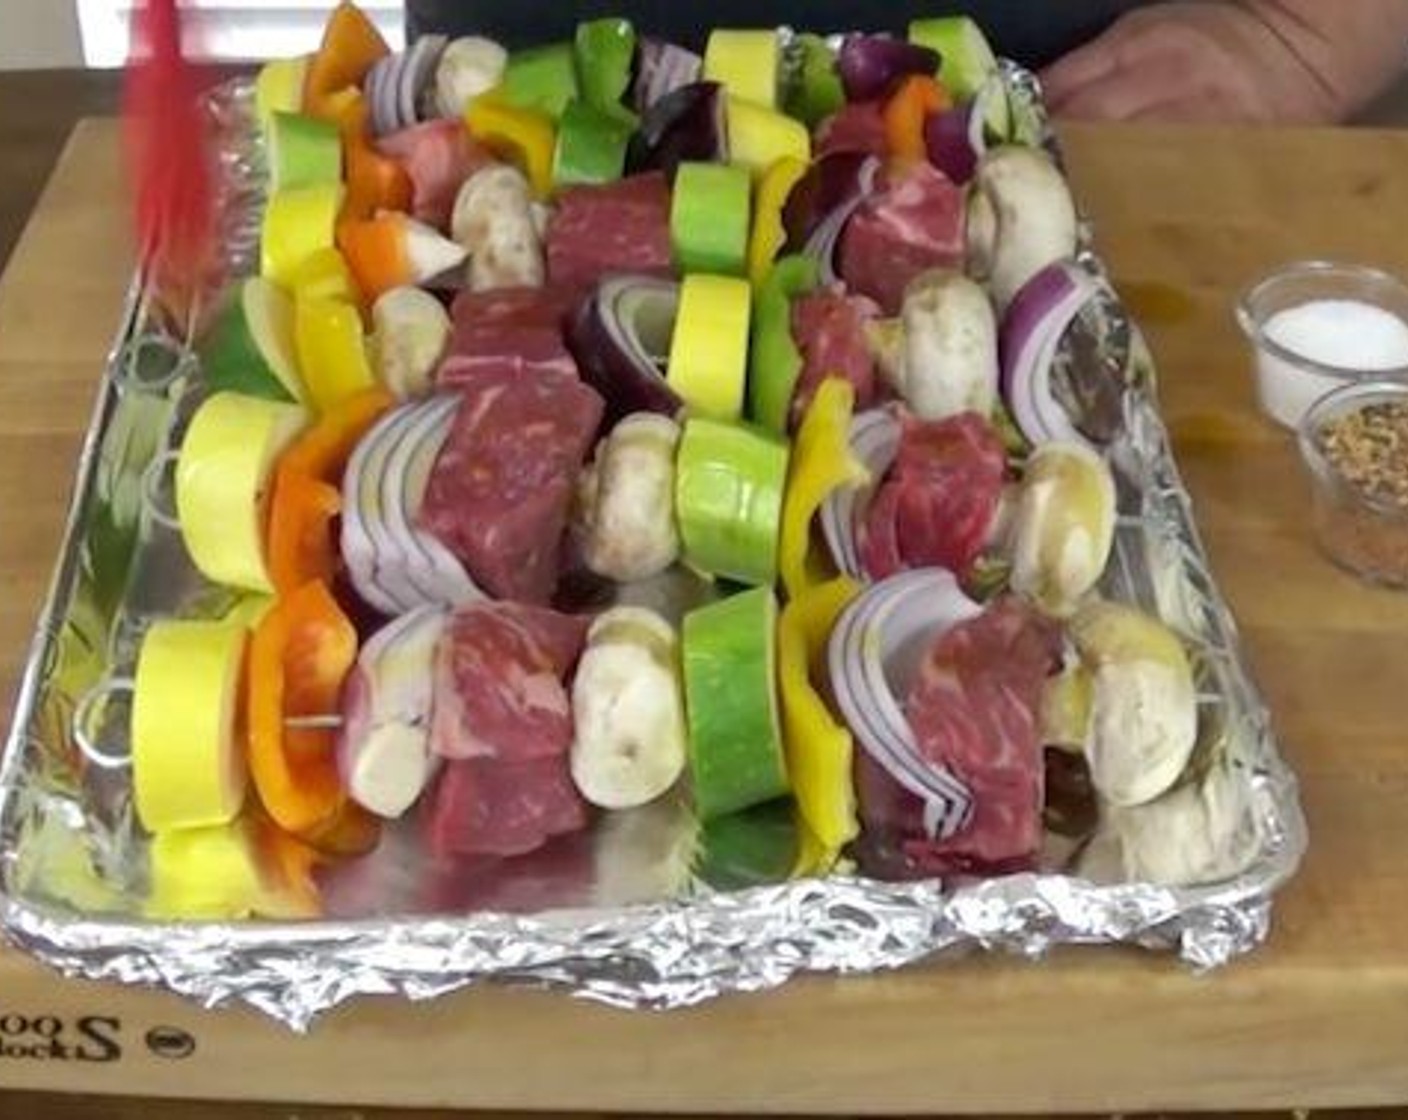 step 3 Use metal or bamboo soaked skewers for assembling steak kabobs. Skewer vegetables, including whole Mushrooms (4 1/2 cups) and steak pieces alternating each type.